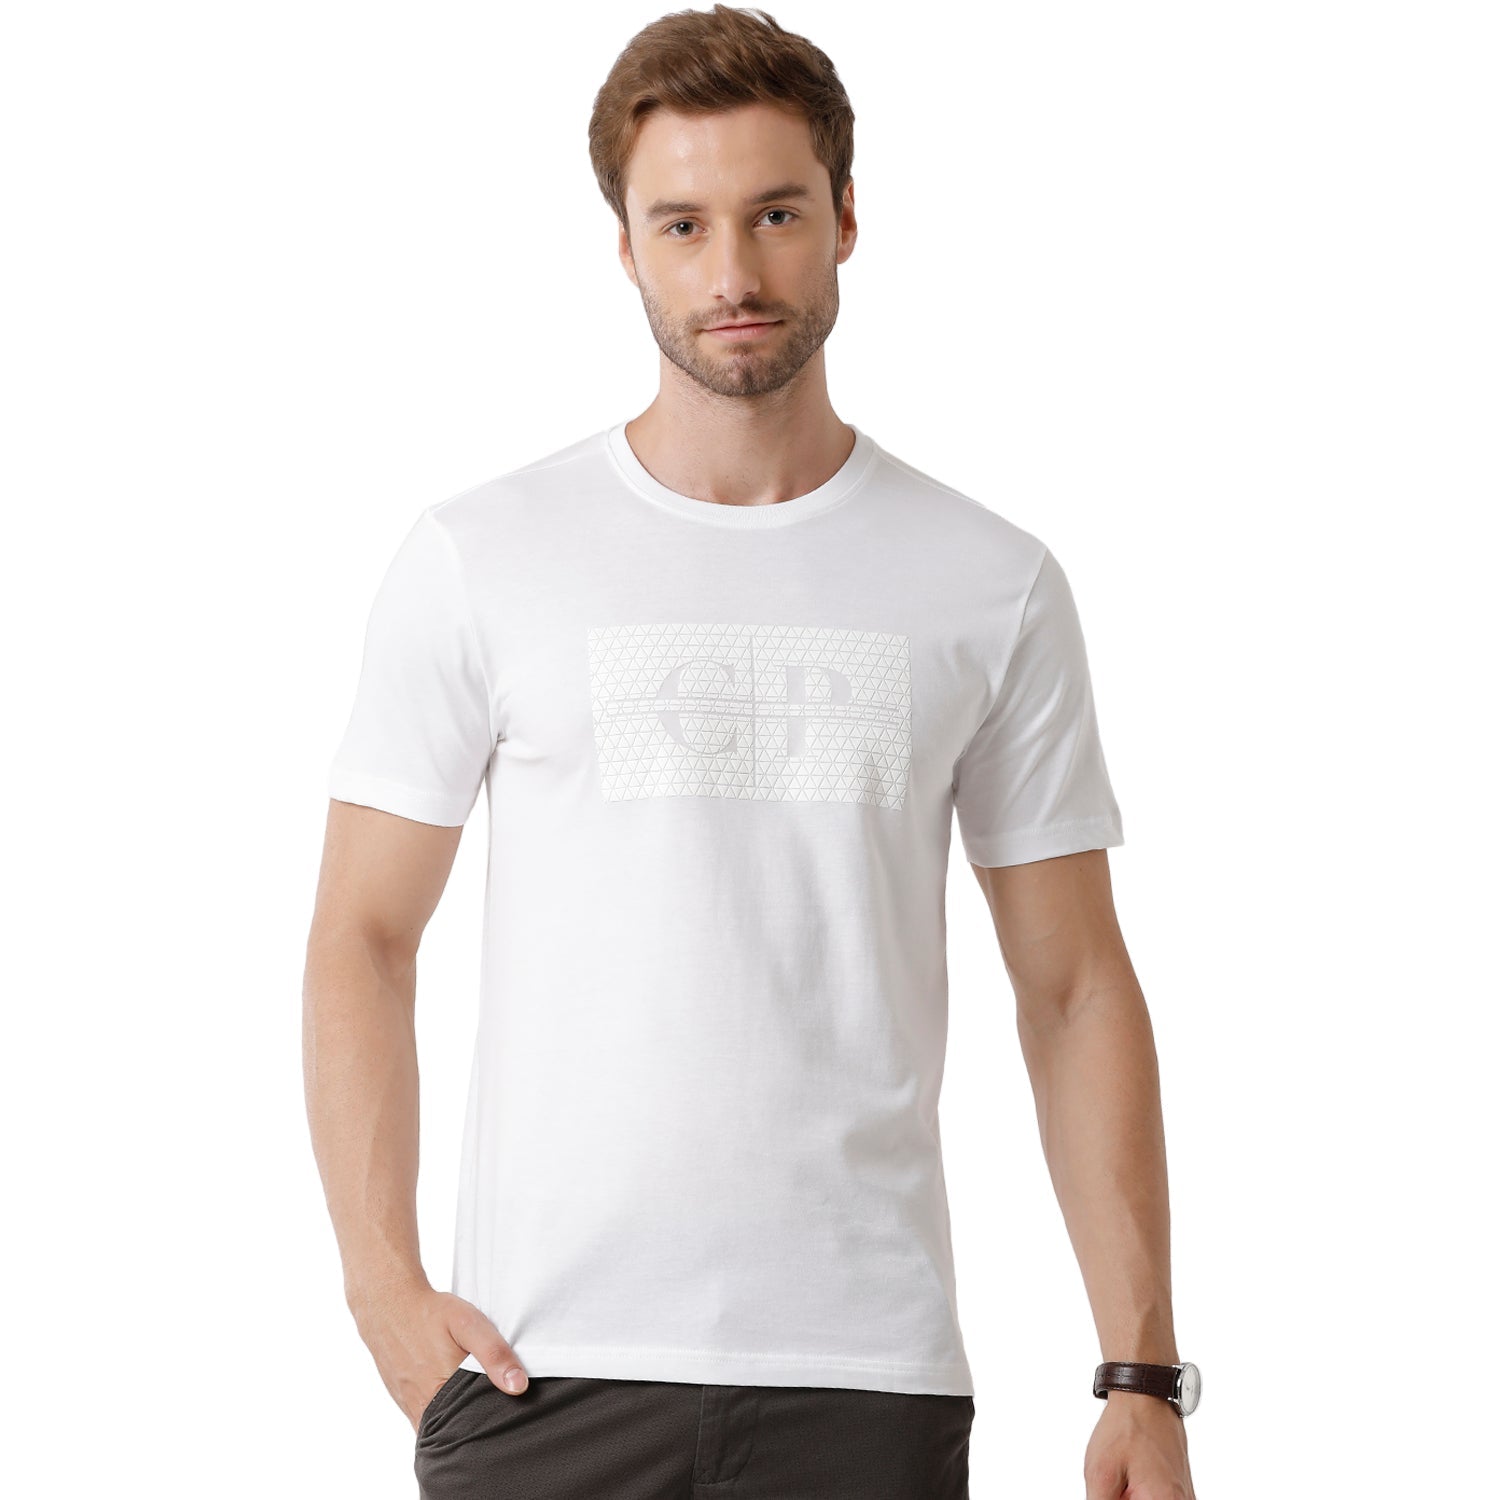 Men's White Color Half Sleeve Round Neck Solid T Shirt - BALENO - 410 B SF C T-shirt Classic Polo 